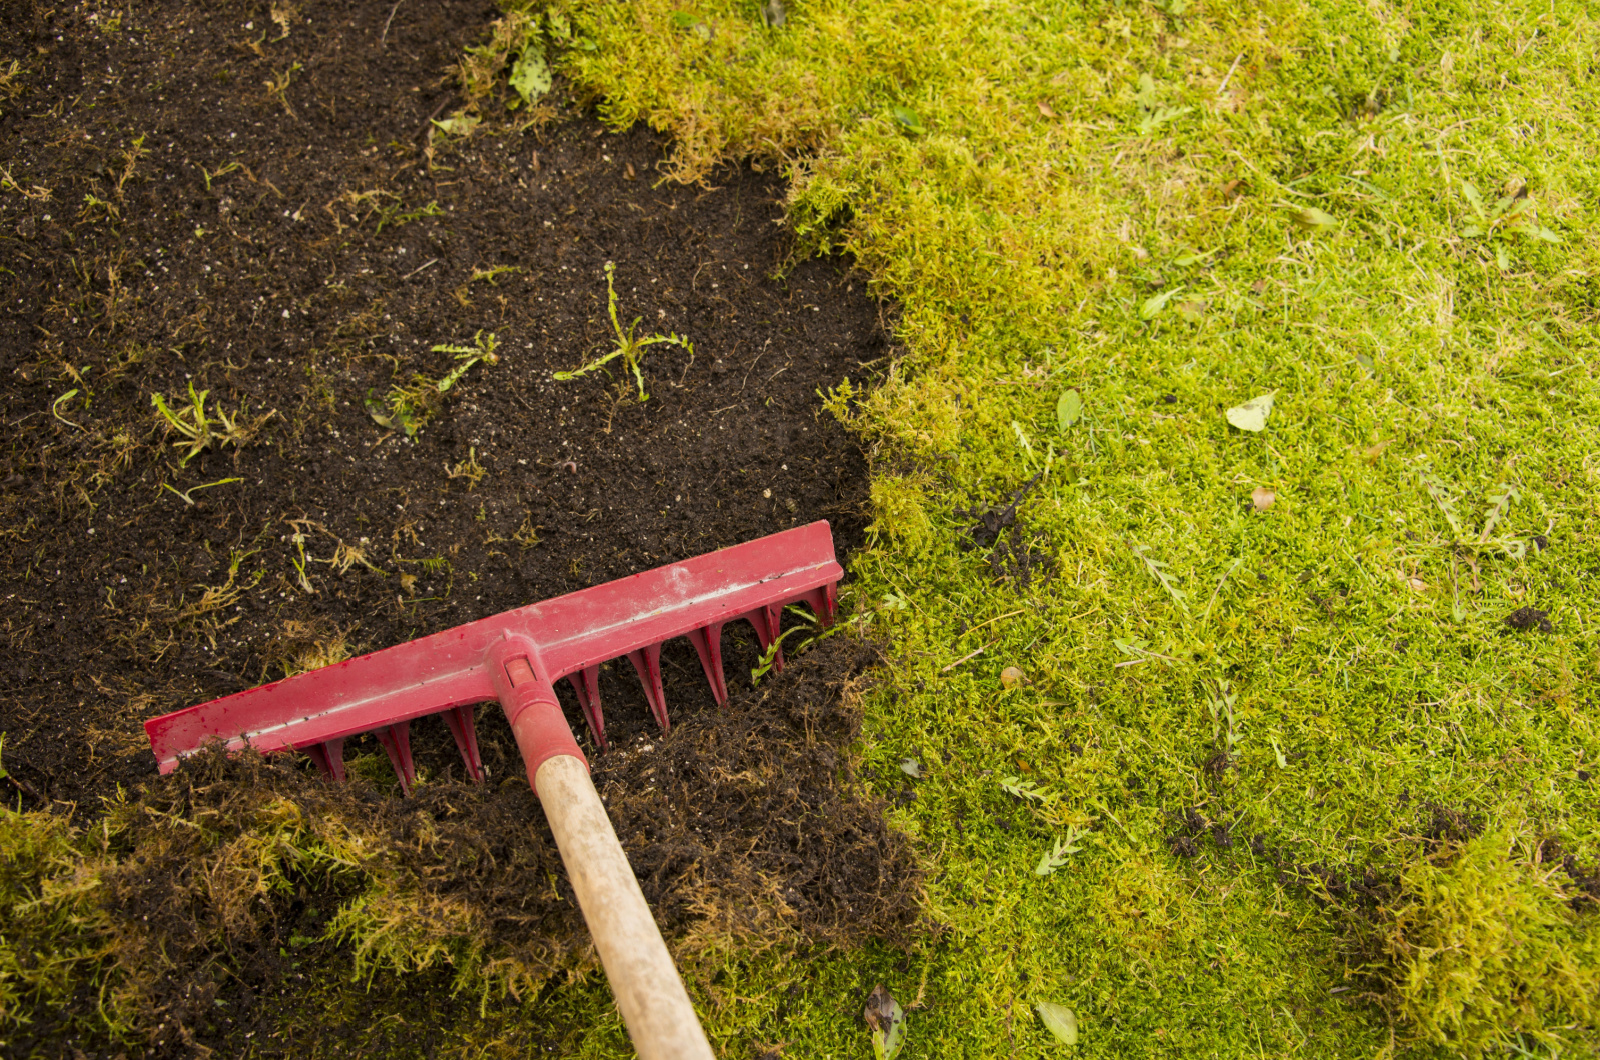 Removing moss from the lawn with a rake